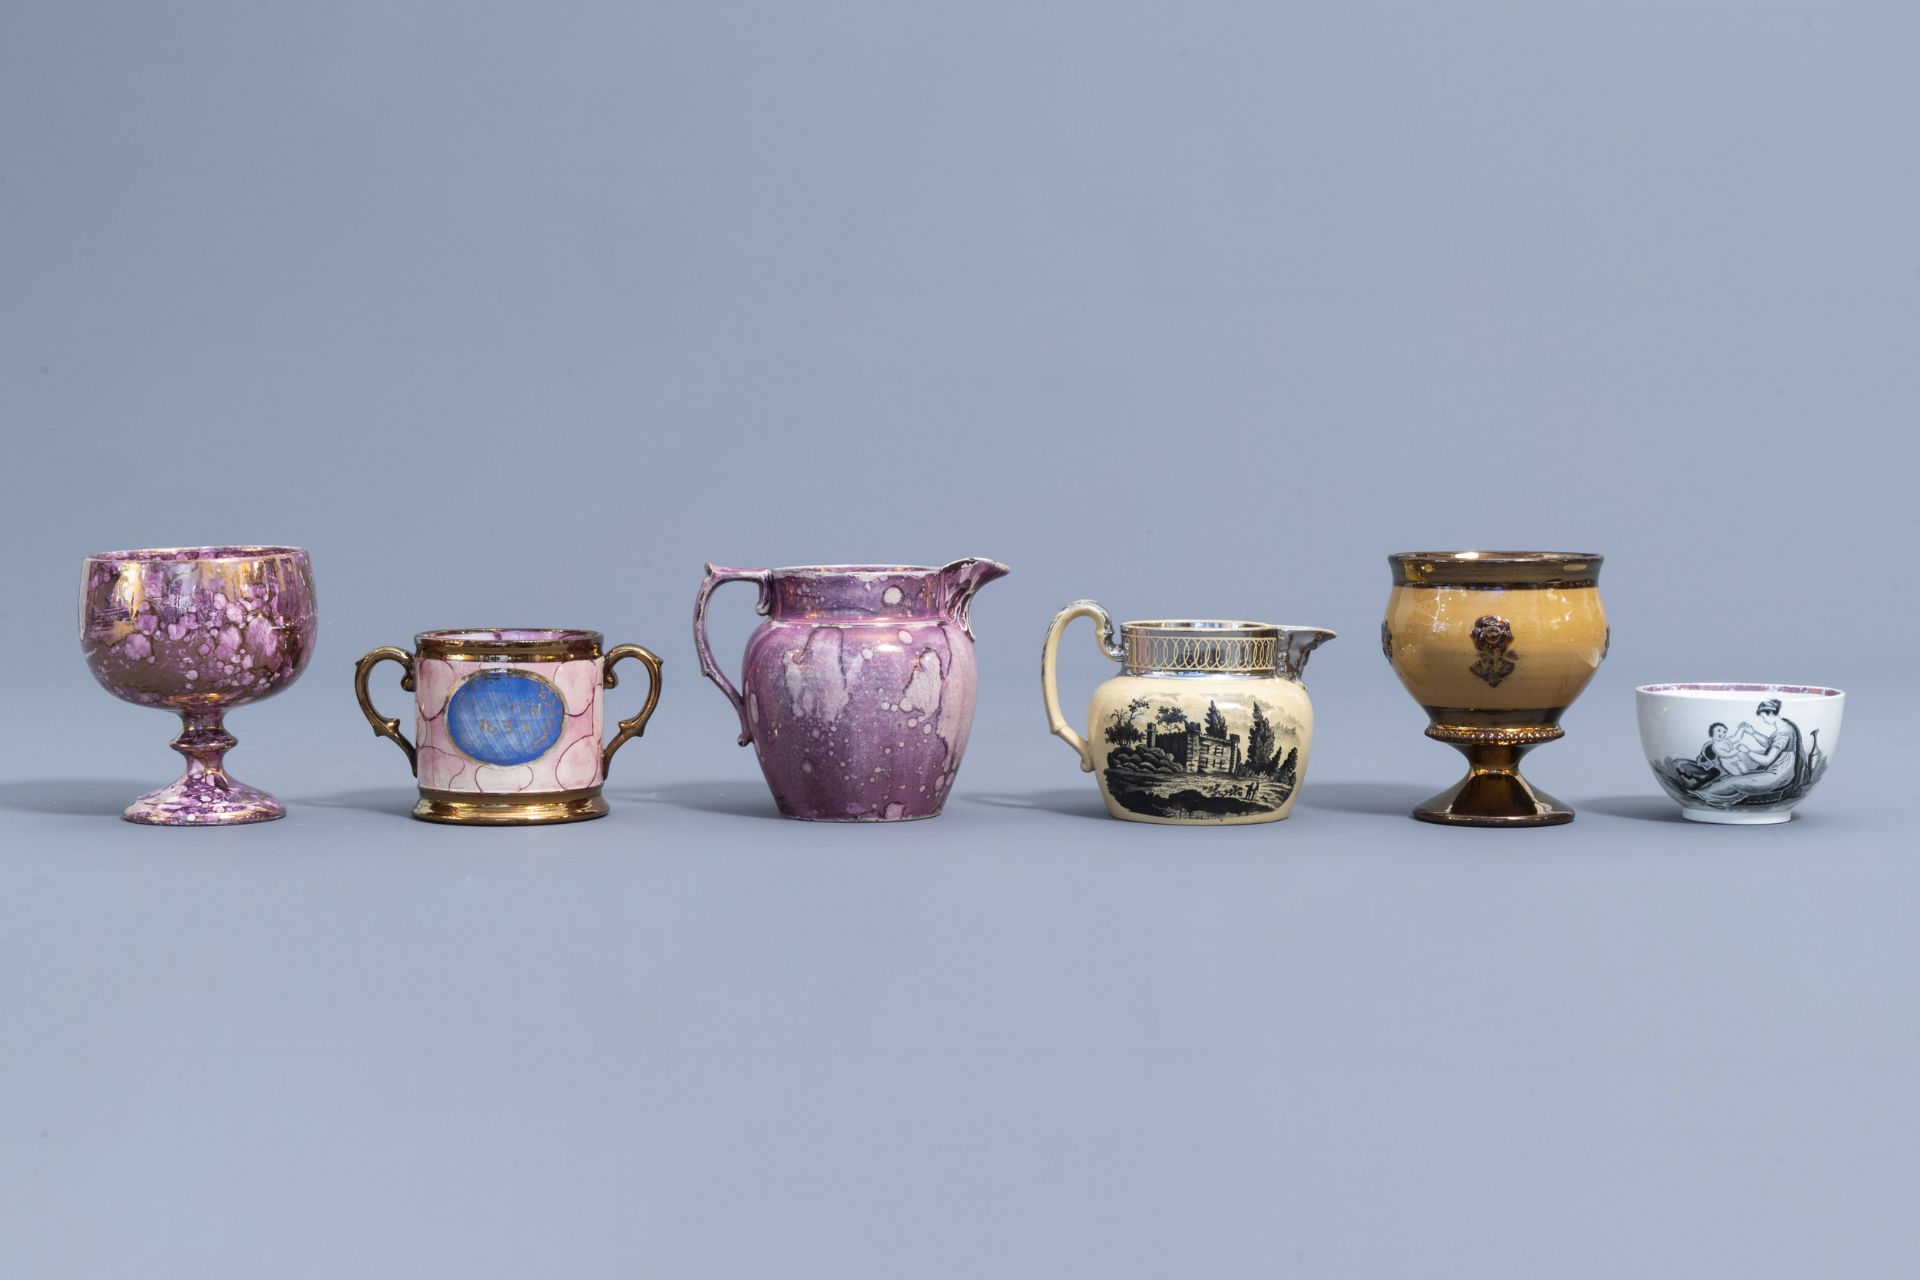 A varied collection of English lustreware items, 19th C. - Image 20 of 42